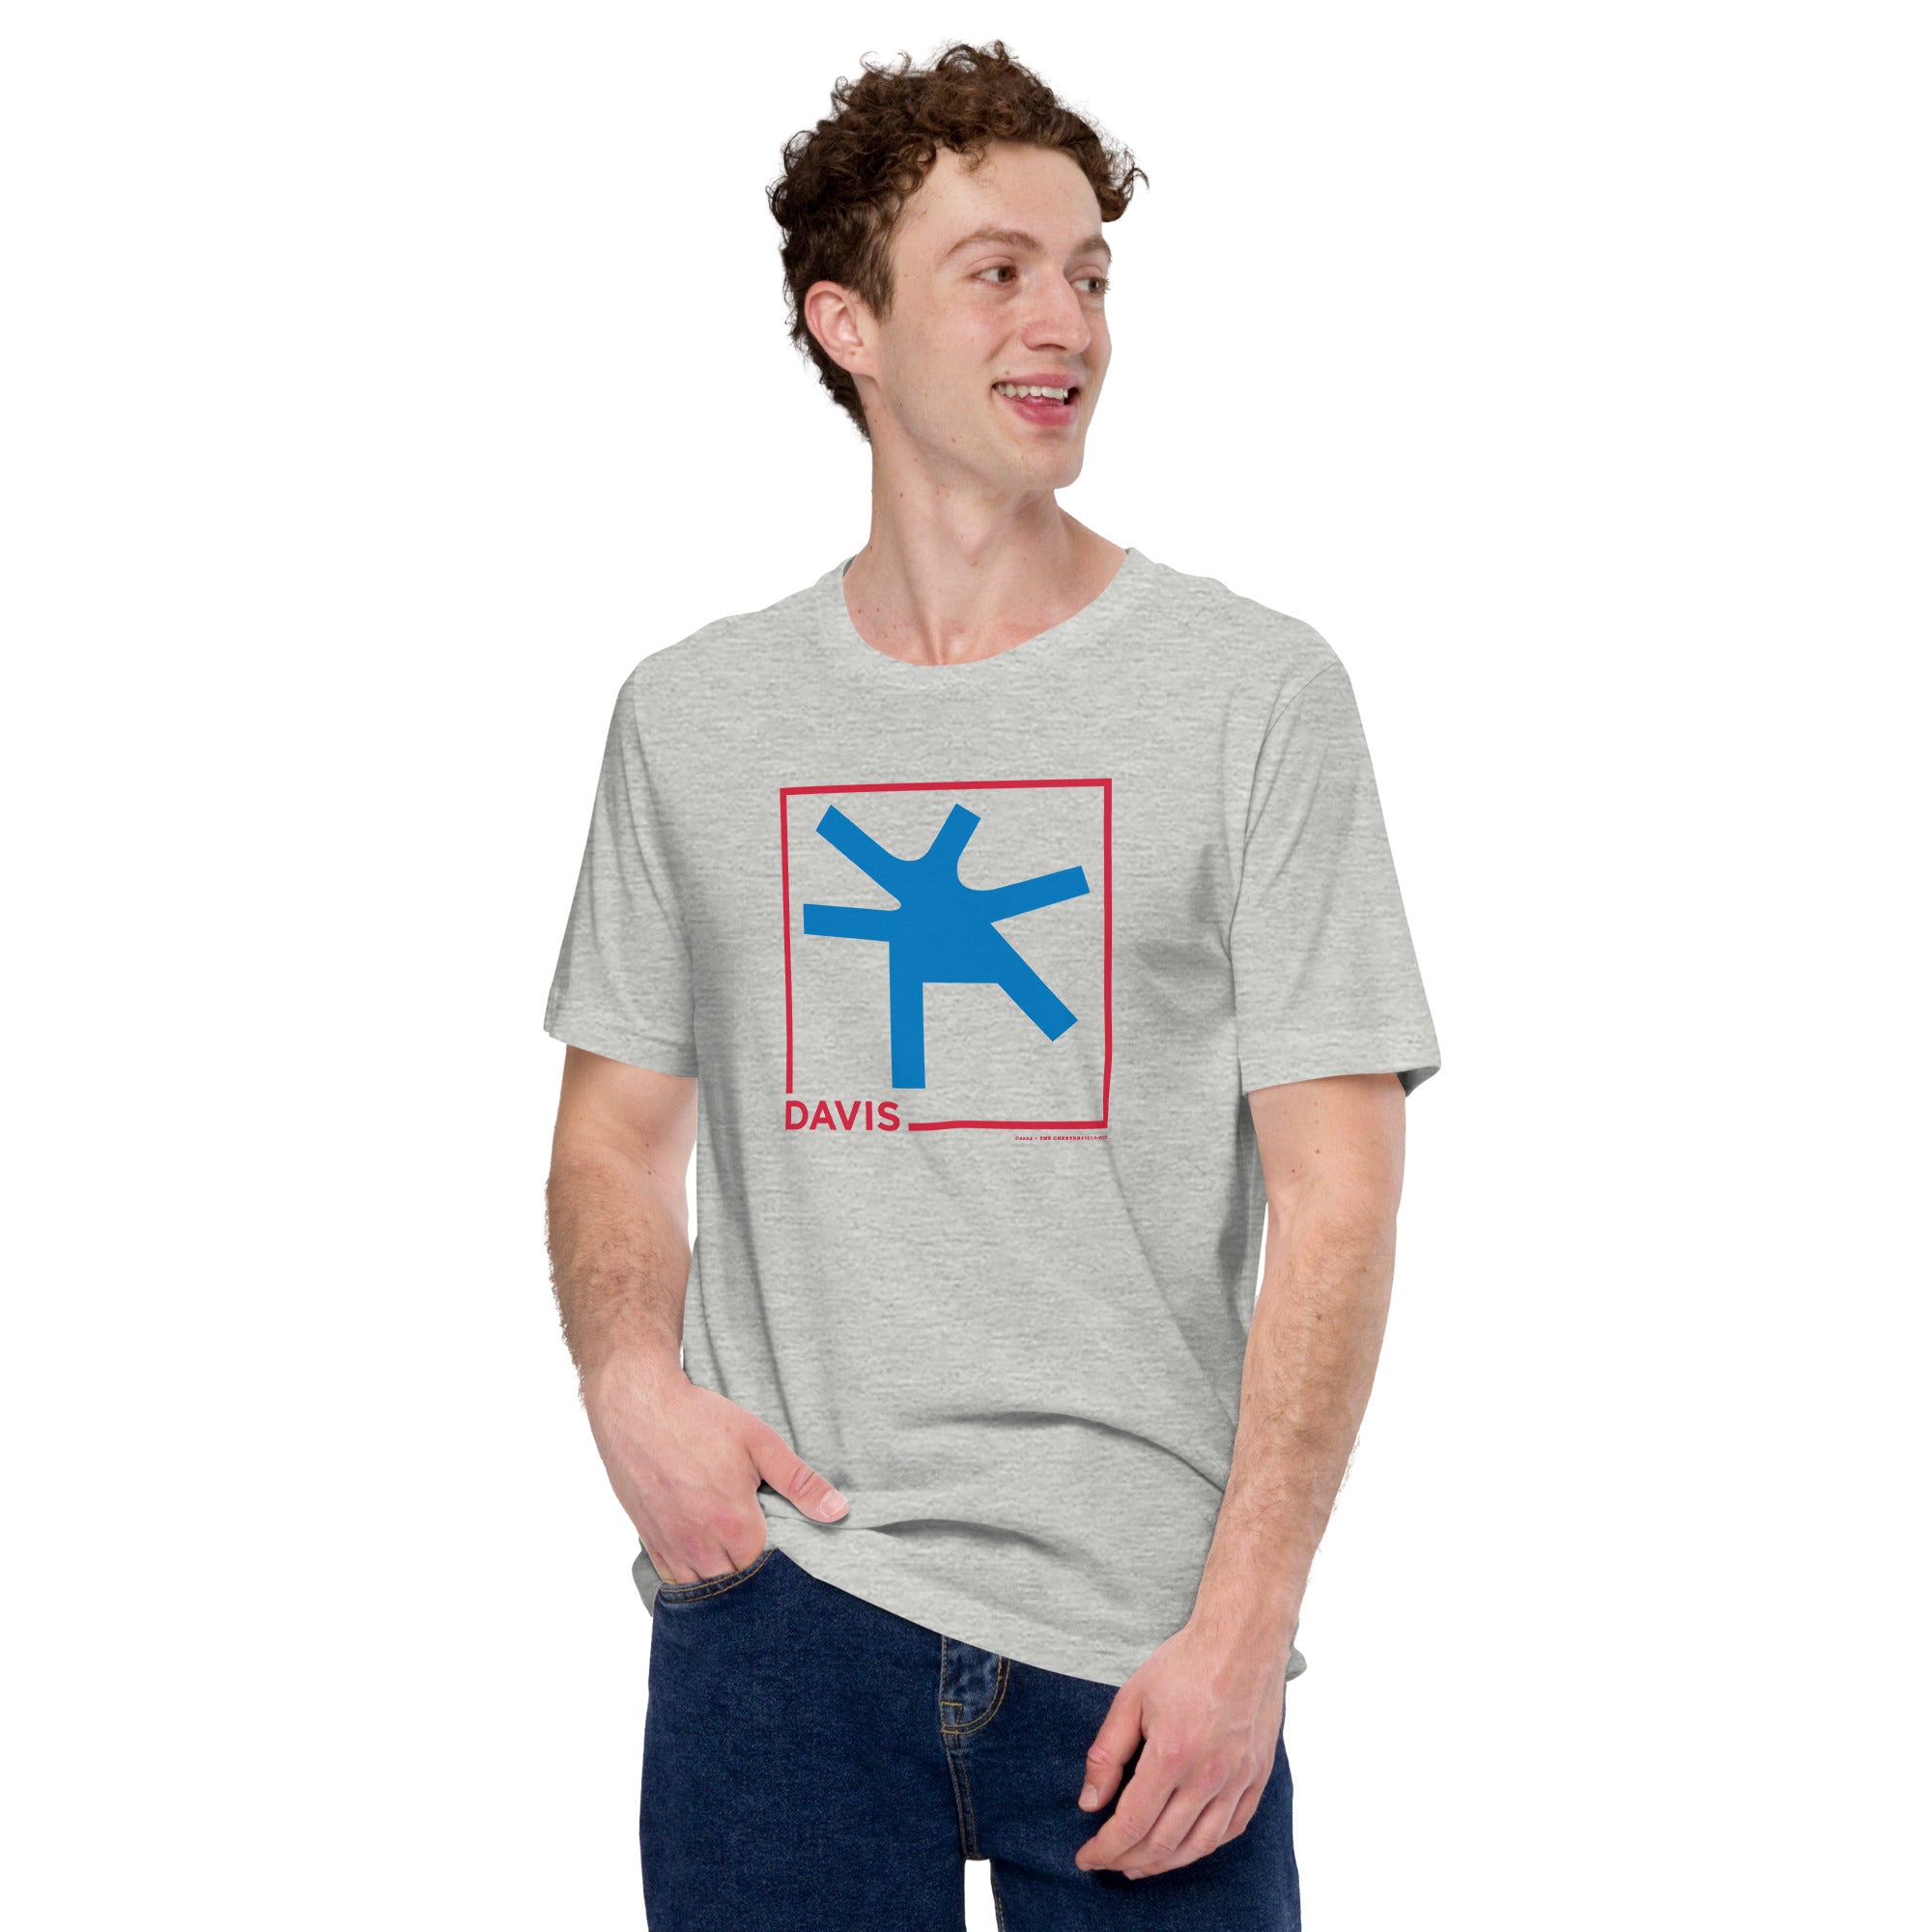 man wearing Grey unisex t-shirt with the word Davis and a square in red, with the blue intersection